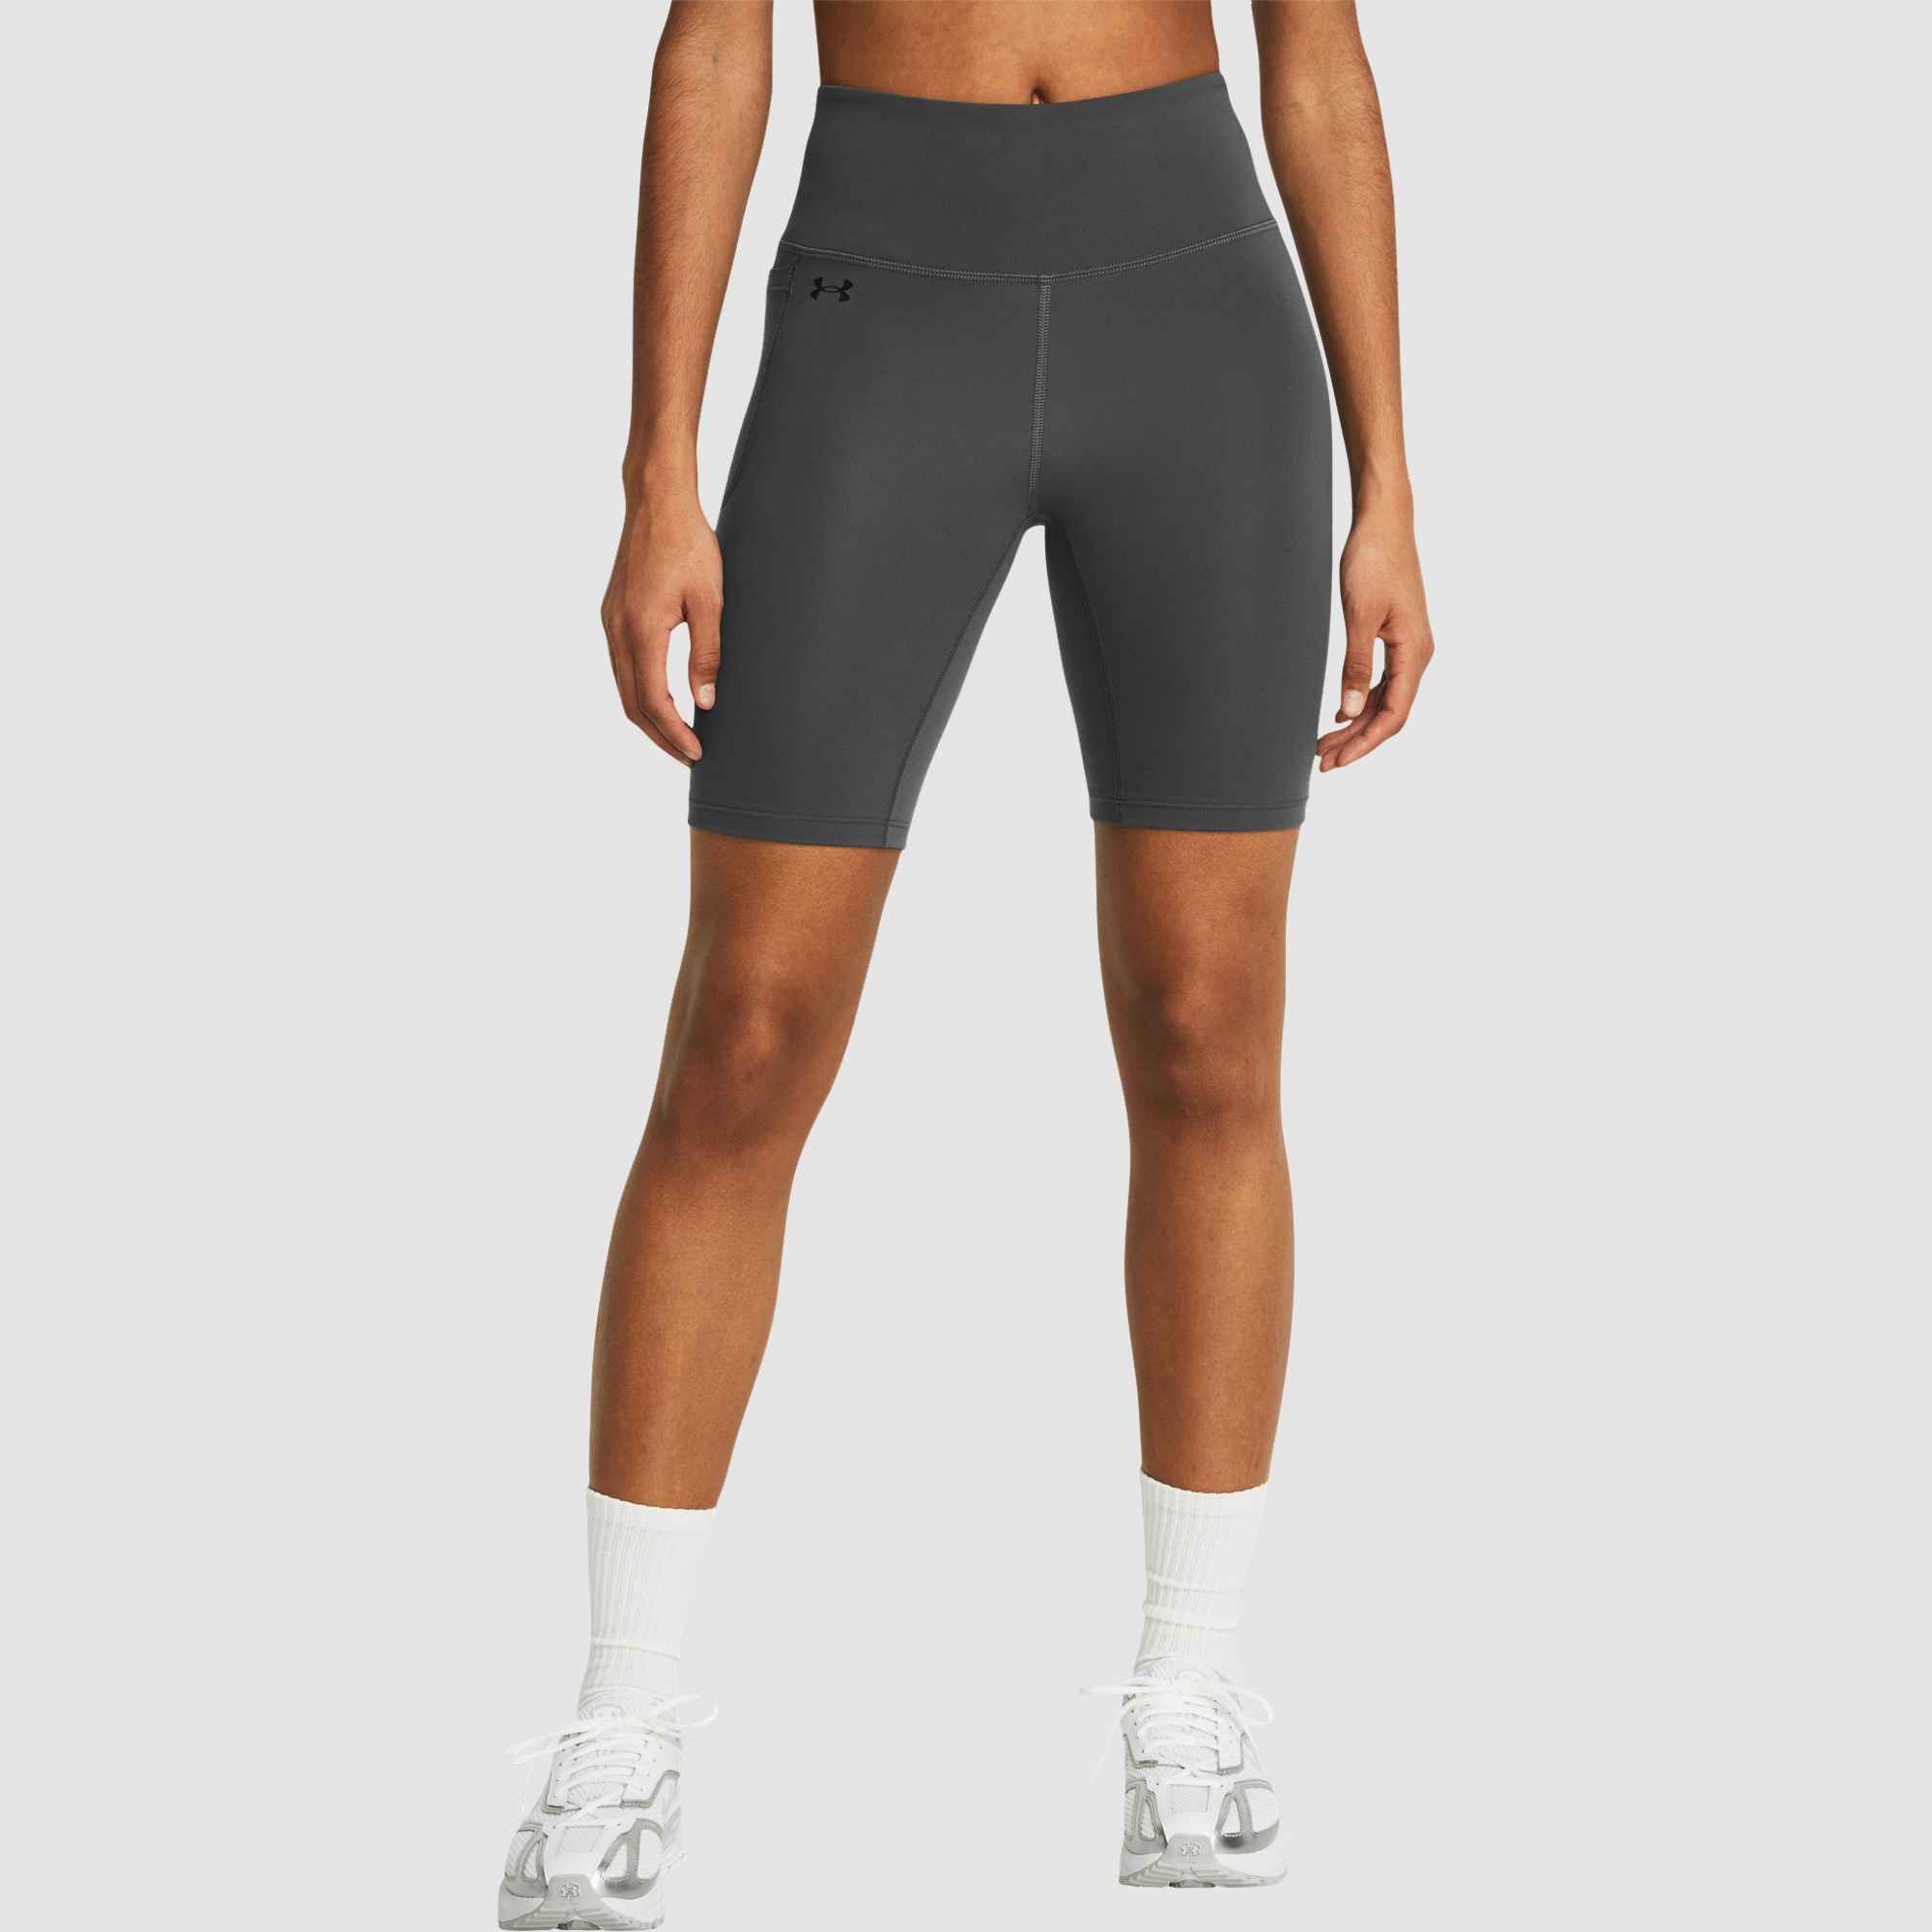 Under Armour Womens Motion Bike Tight